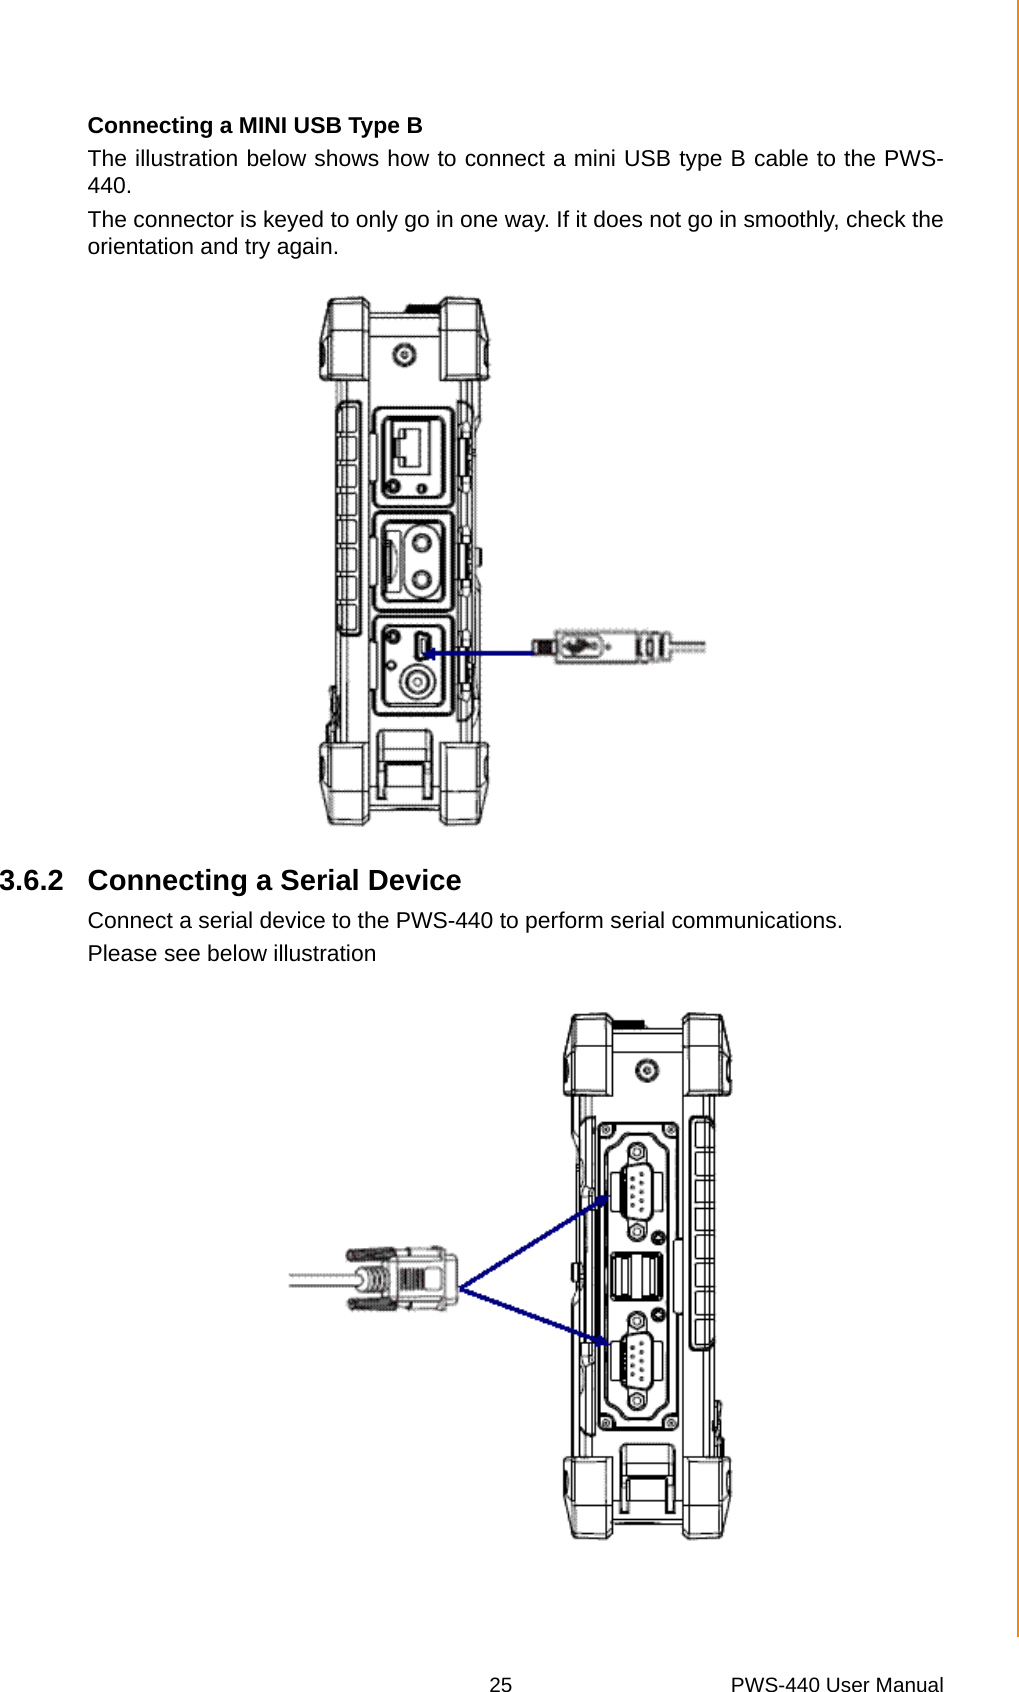 25 PWS-440 User ManualChapter 3 Using the HardwareConnecting a MINI USB Type BThe illustration below shows how to connect a mini USB type B cable to the PWS-440.The connector is keyed to only go in one way. If it does not go in smoothly, check theorientation and try again.3.6.2 Connecting a Serial DeviceConnect a serial device to the PWS-440 to perform serial communications.Please see below illustration